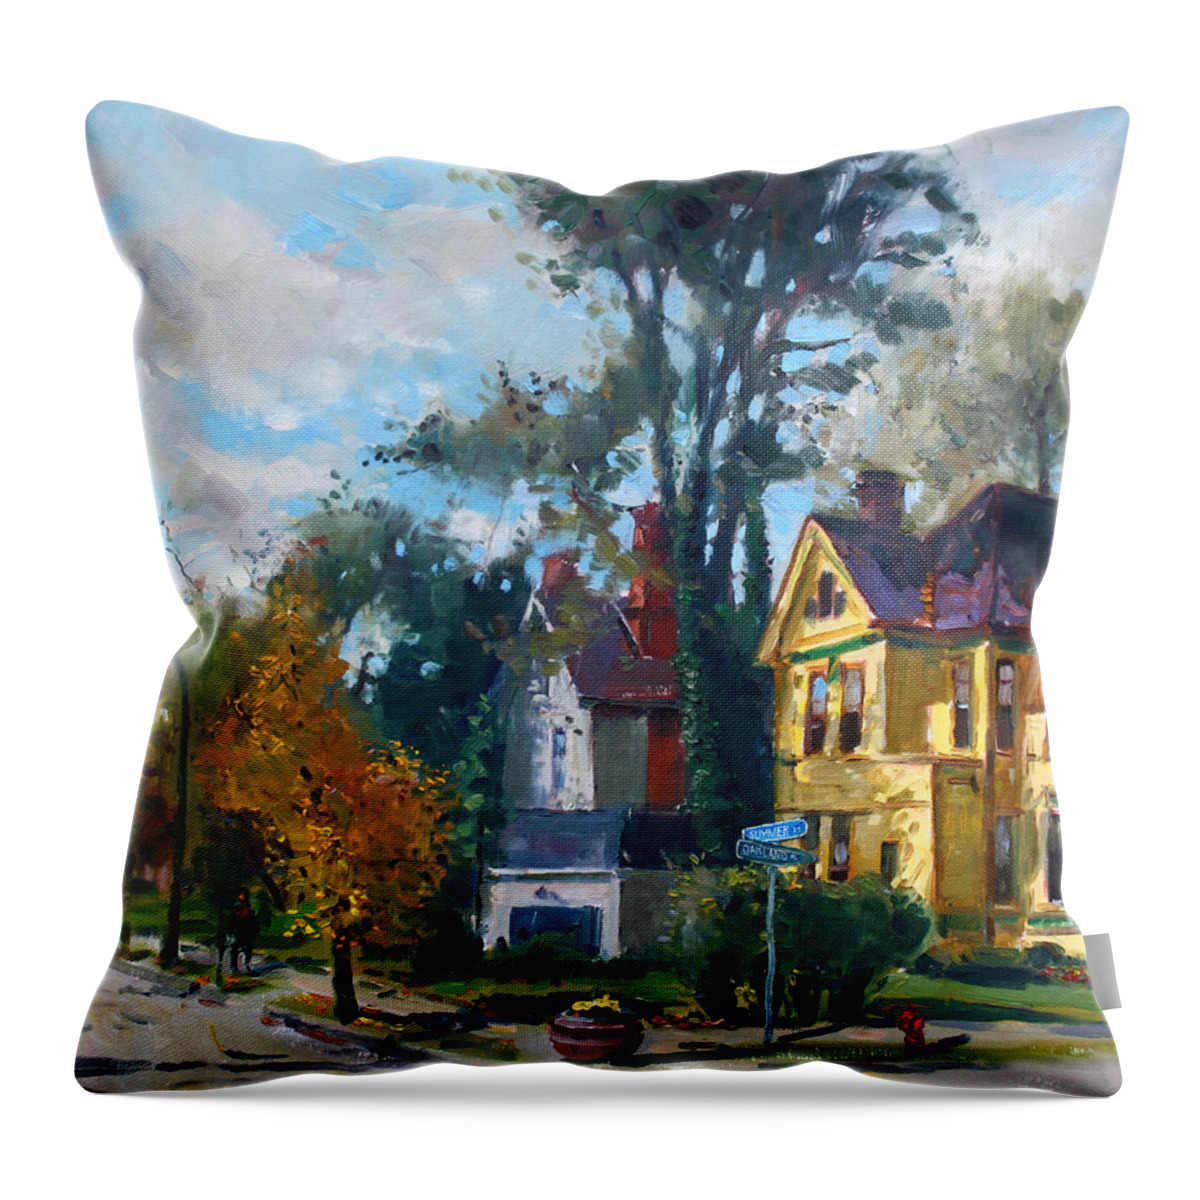 Yellow House Throw Pillow featuring the painting Yellow House by Ylli Haruni